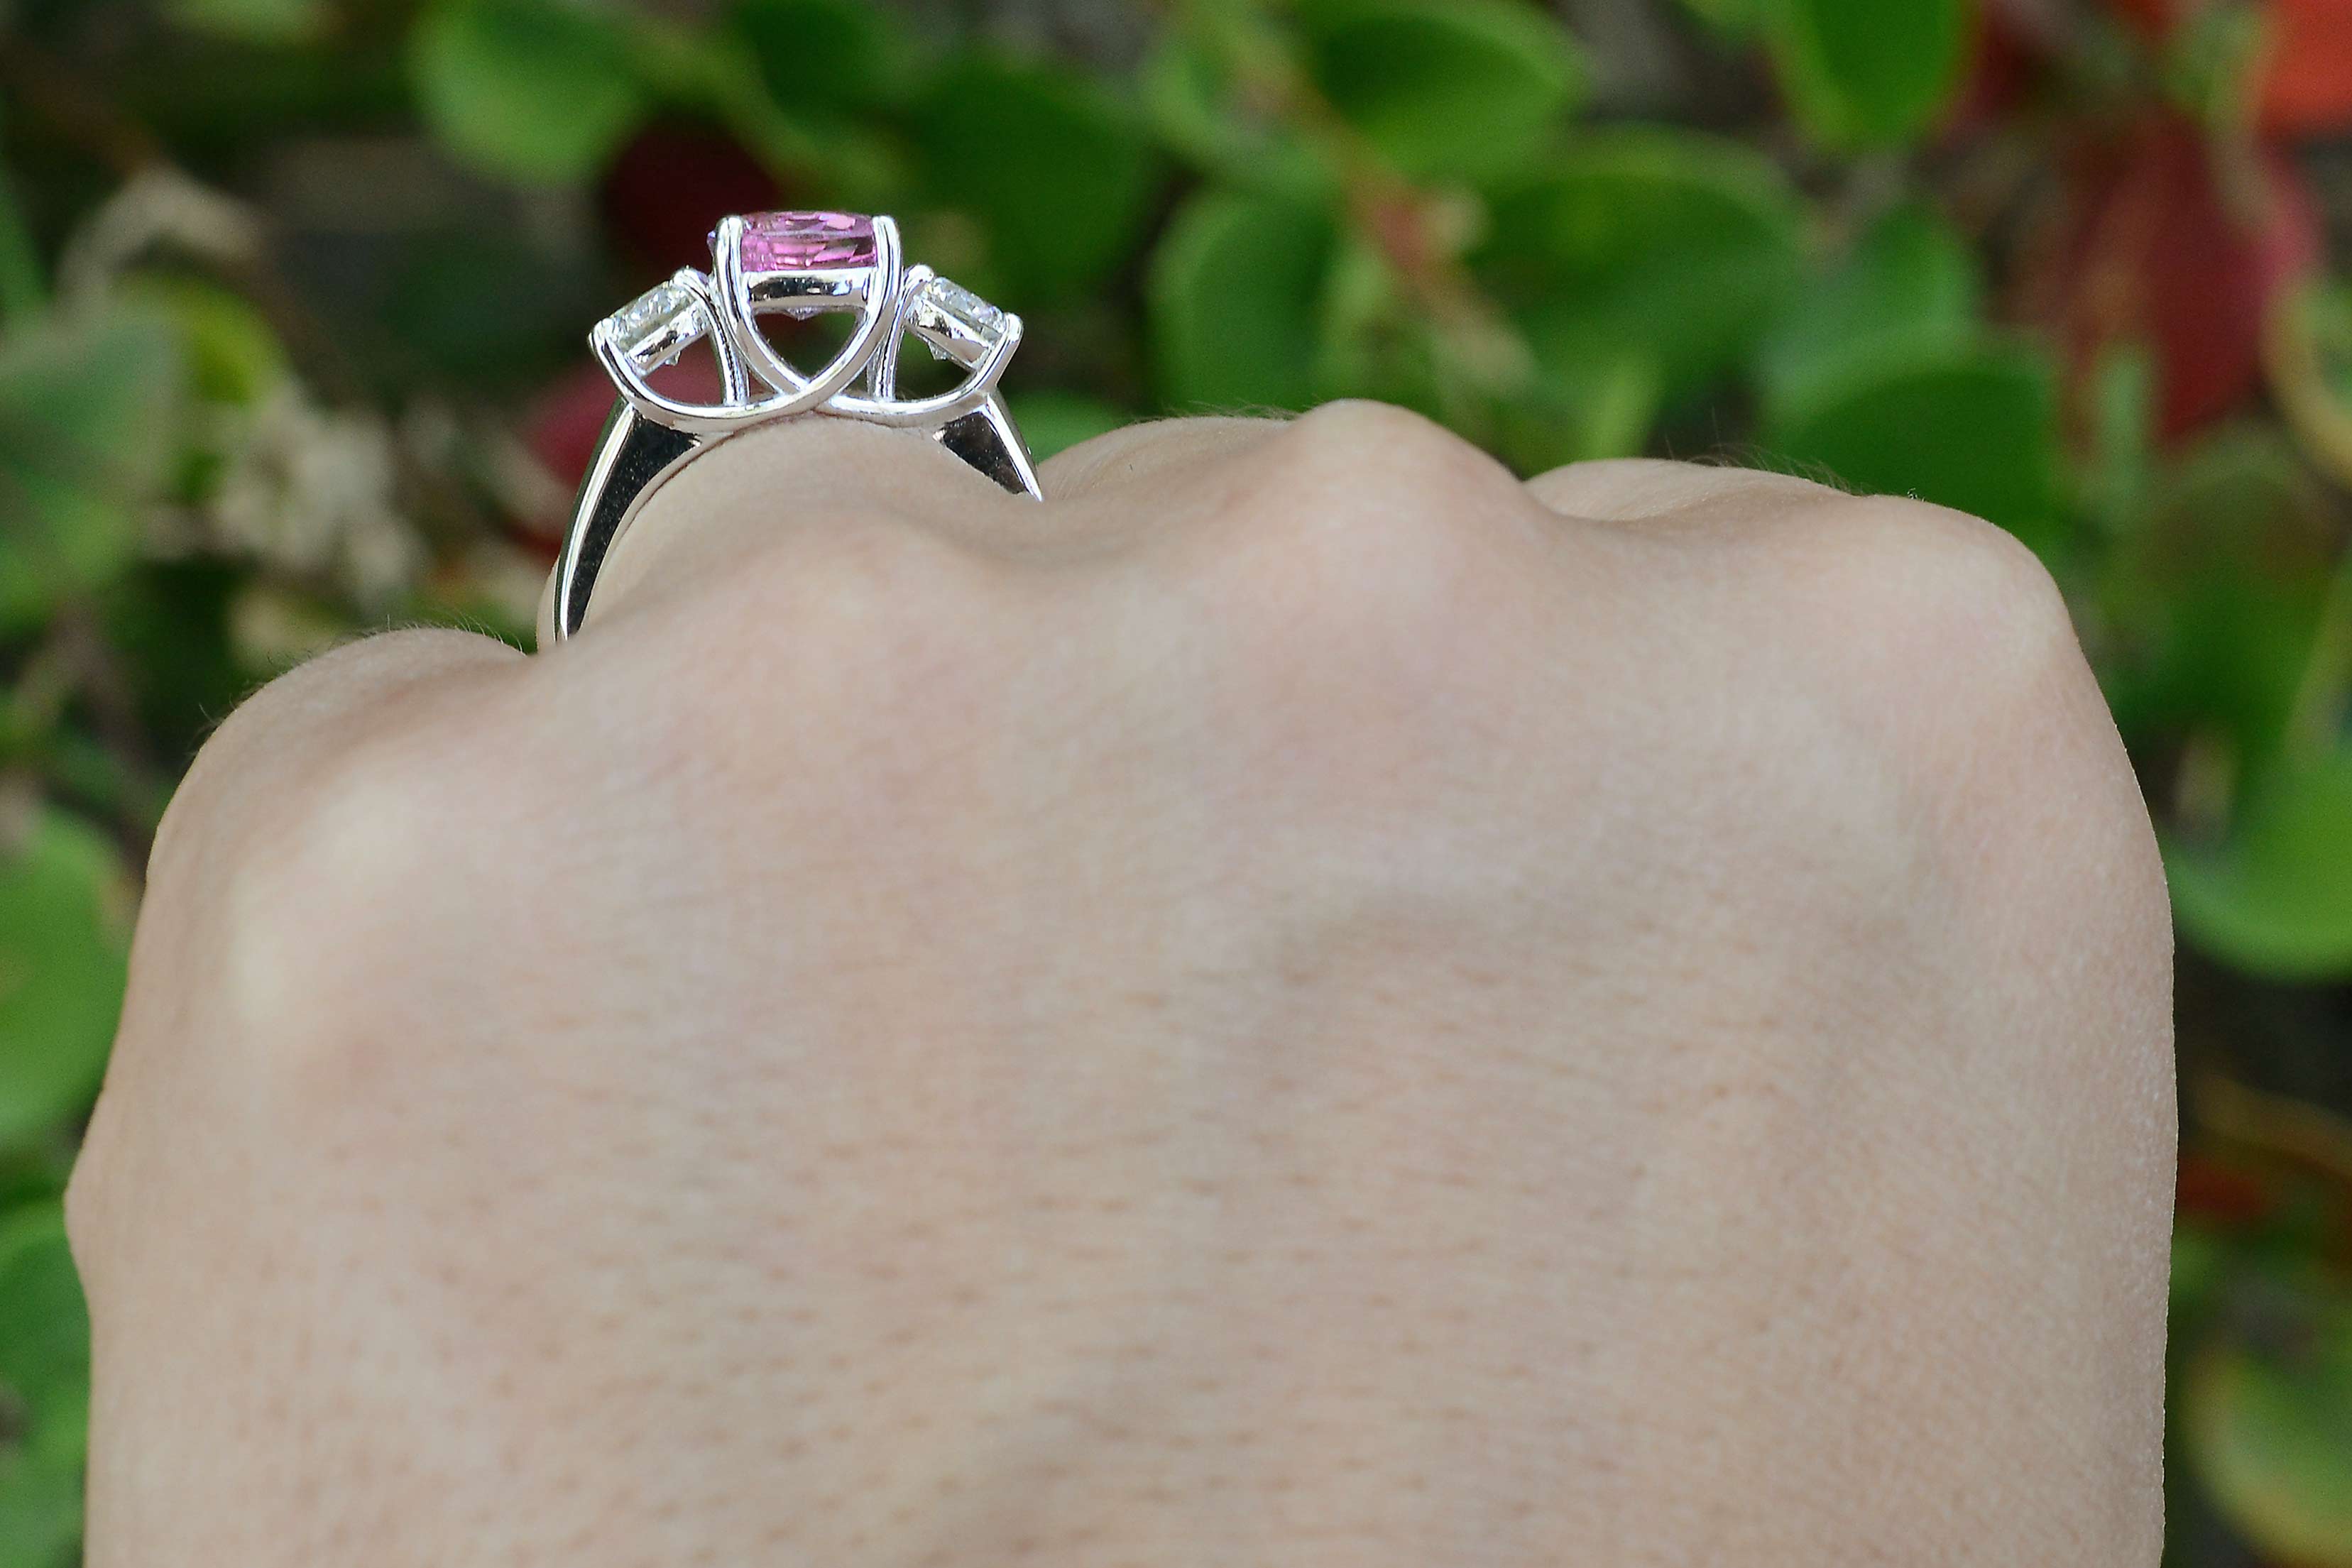 This setting is styled after the Tiffany Lucida ring, with an interesting twist.